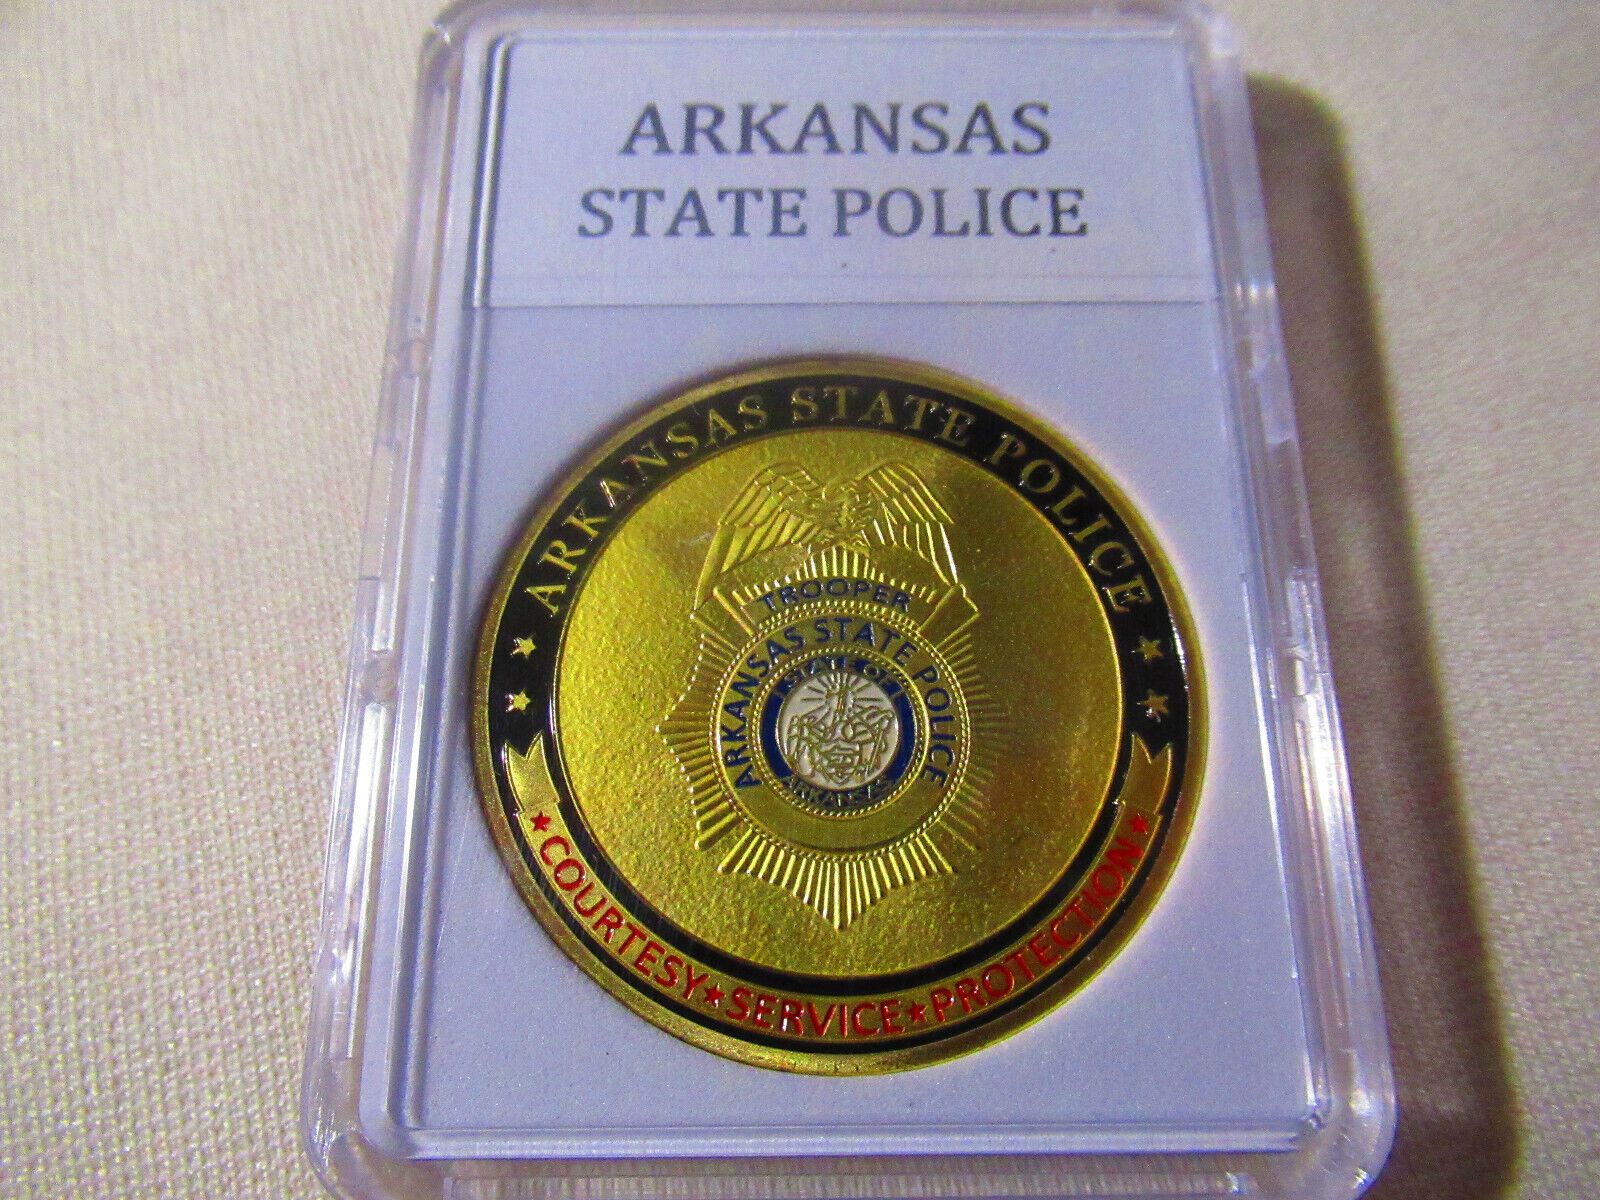 ARKANSAS STATE POLICE Challenge Coin